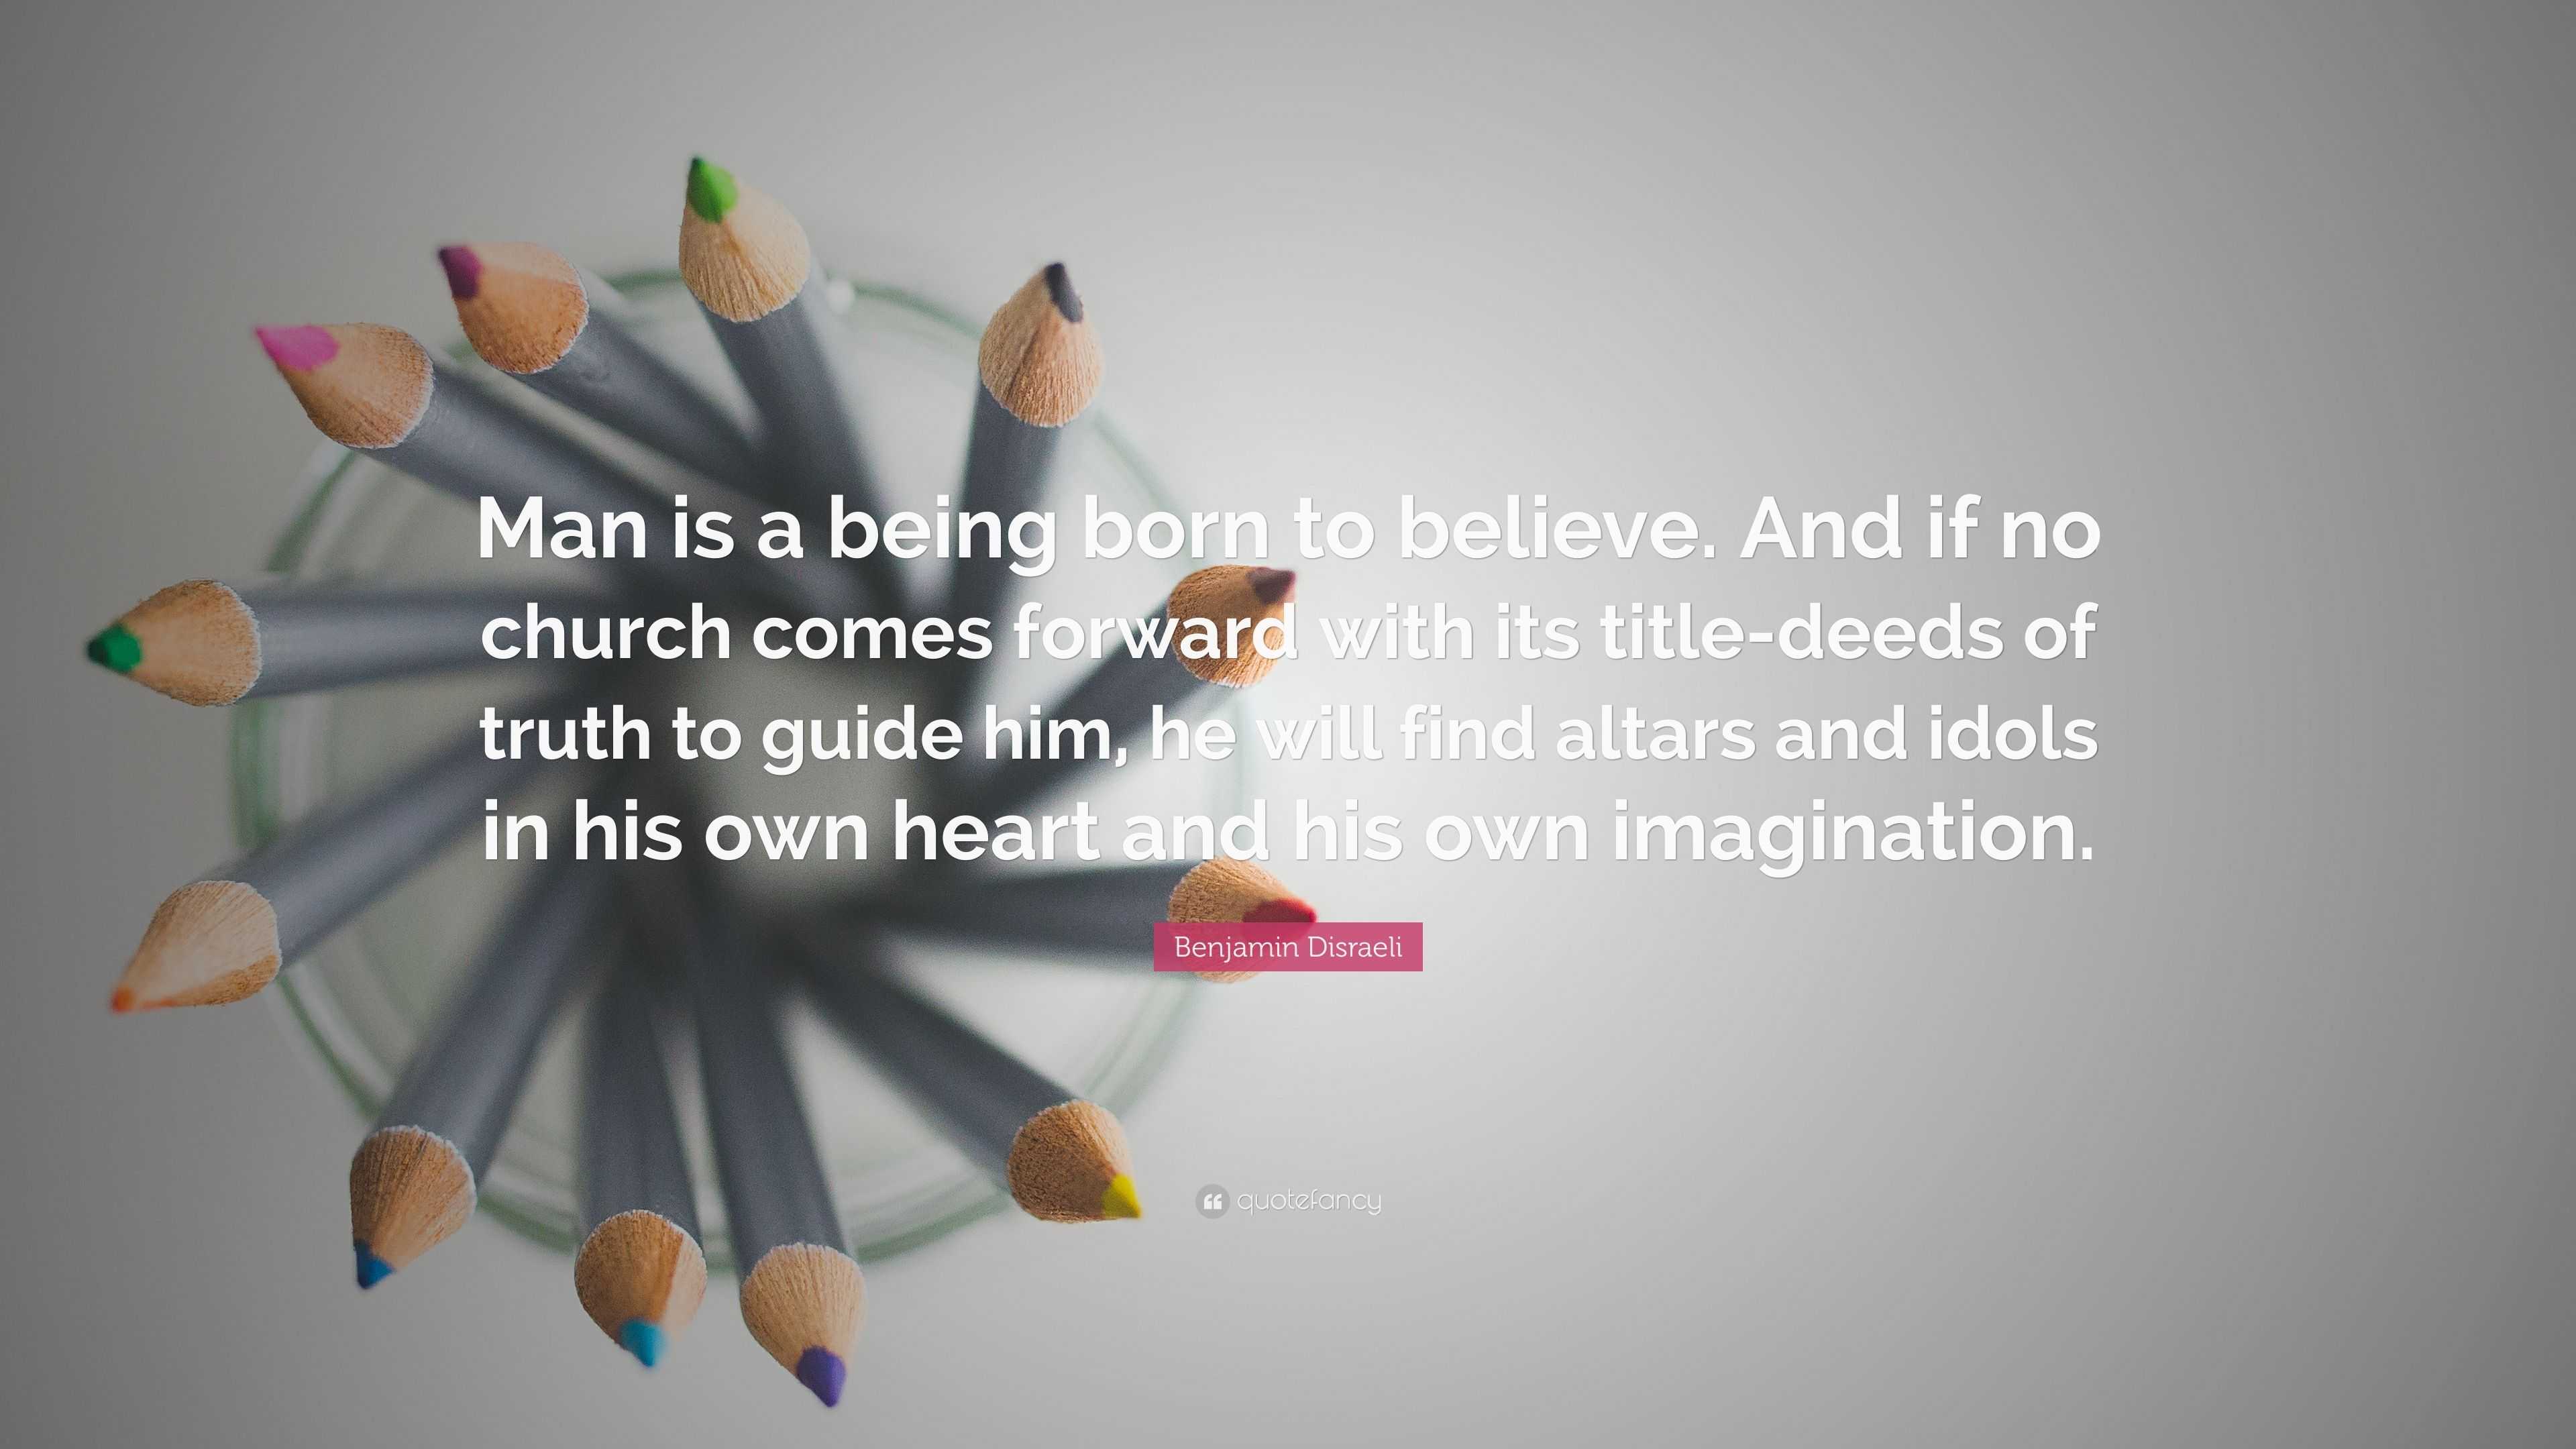 Benjamin Disraeli Quote: “Man is a being born to believe. And if